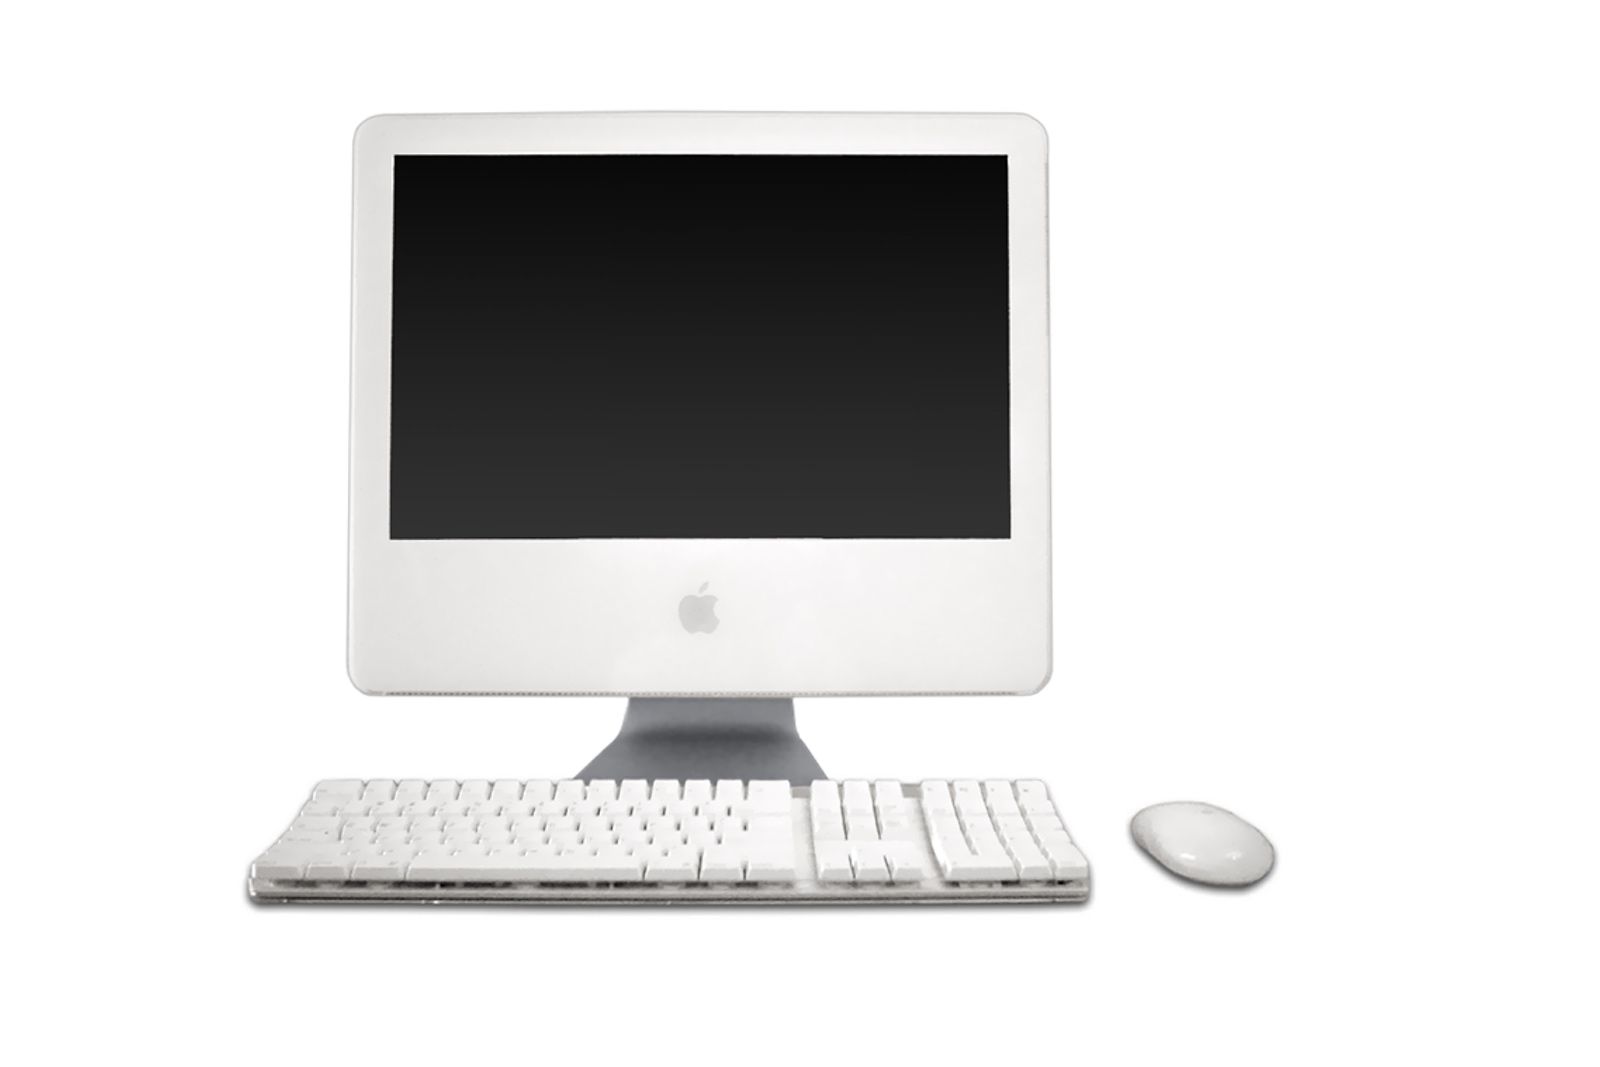 Historic Apple Mac Computers - Walk Down Memory Lane With These Classic Machines image 166